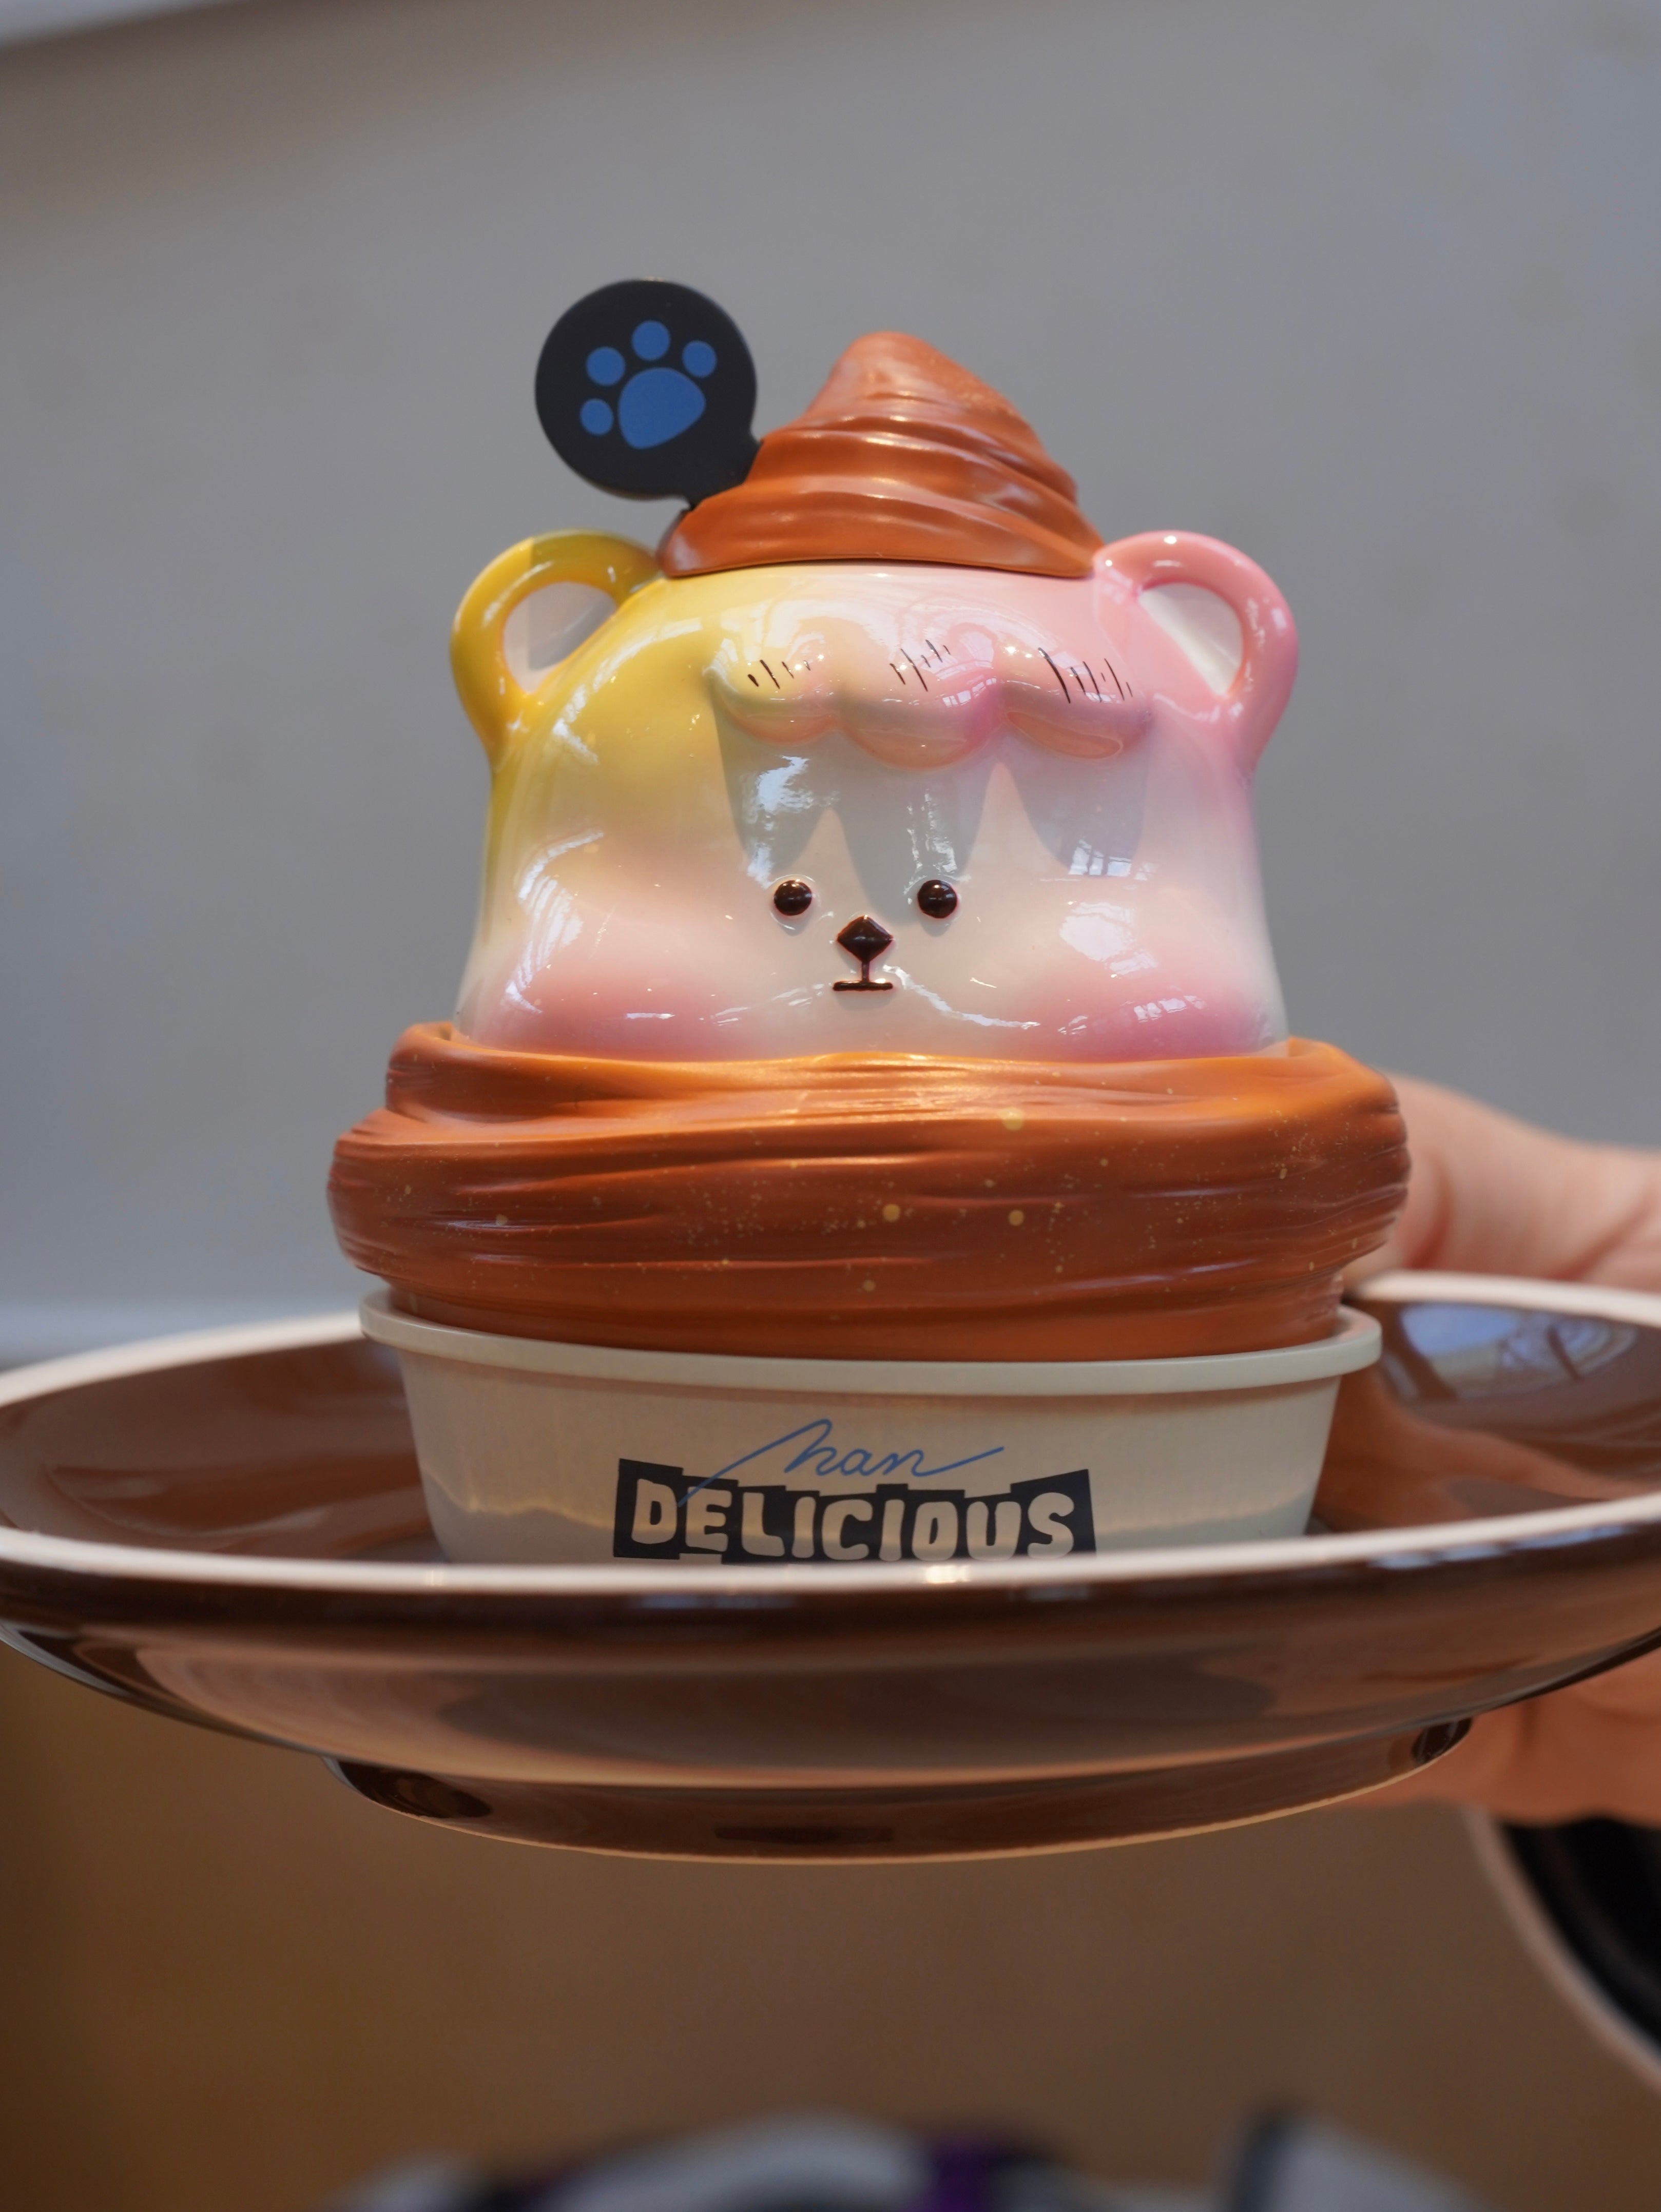 Croissant Han Han toy on plate with dessert items and paw print detail.